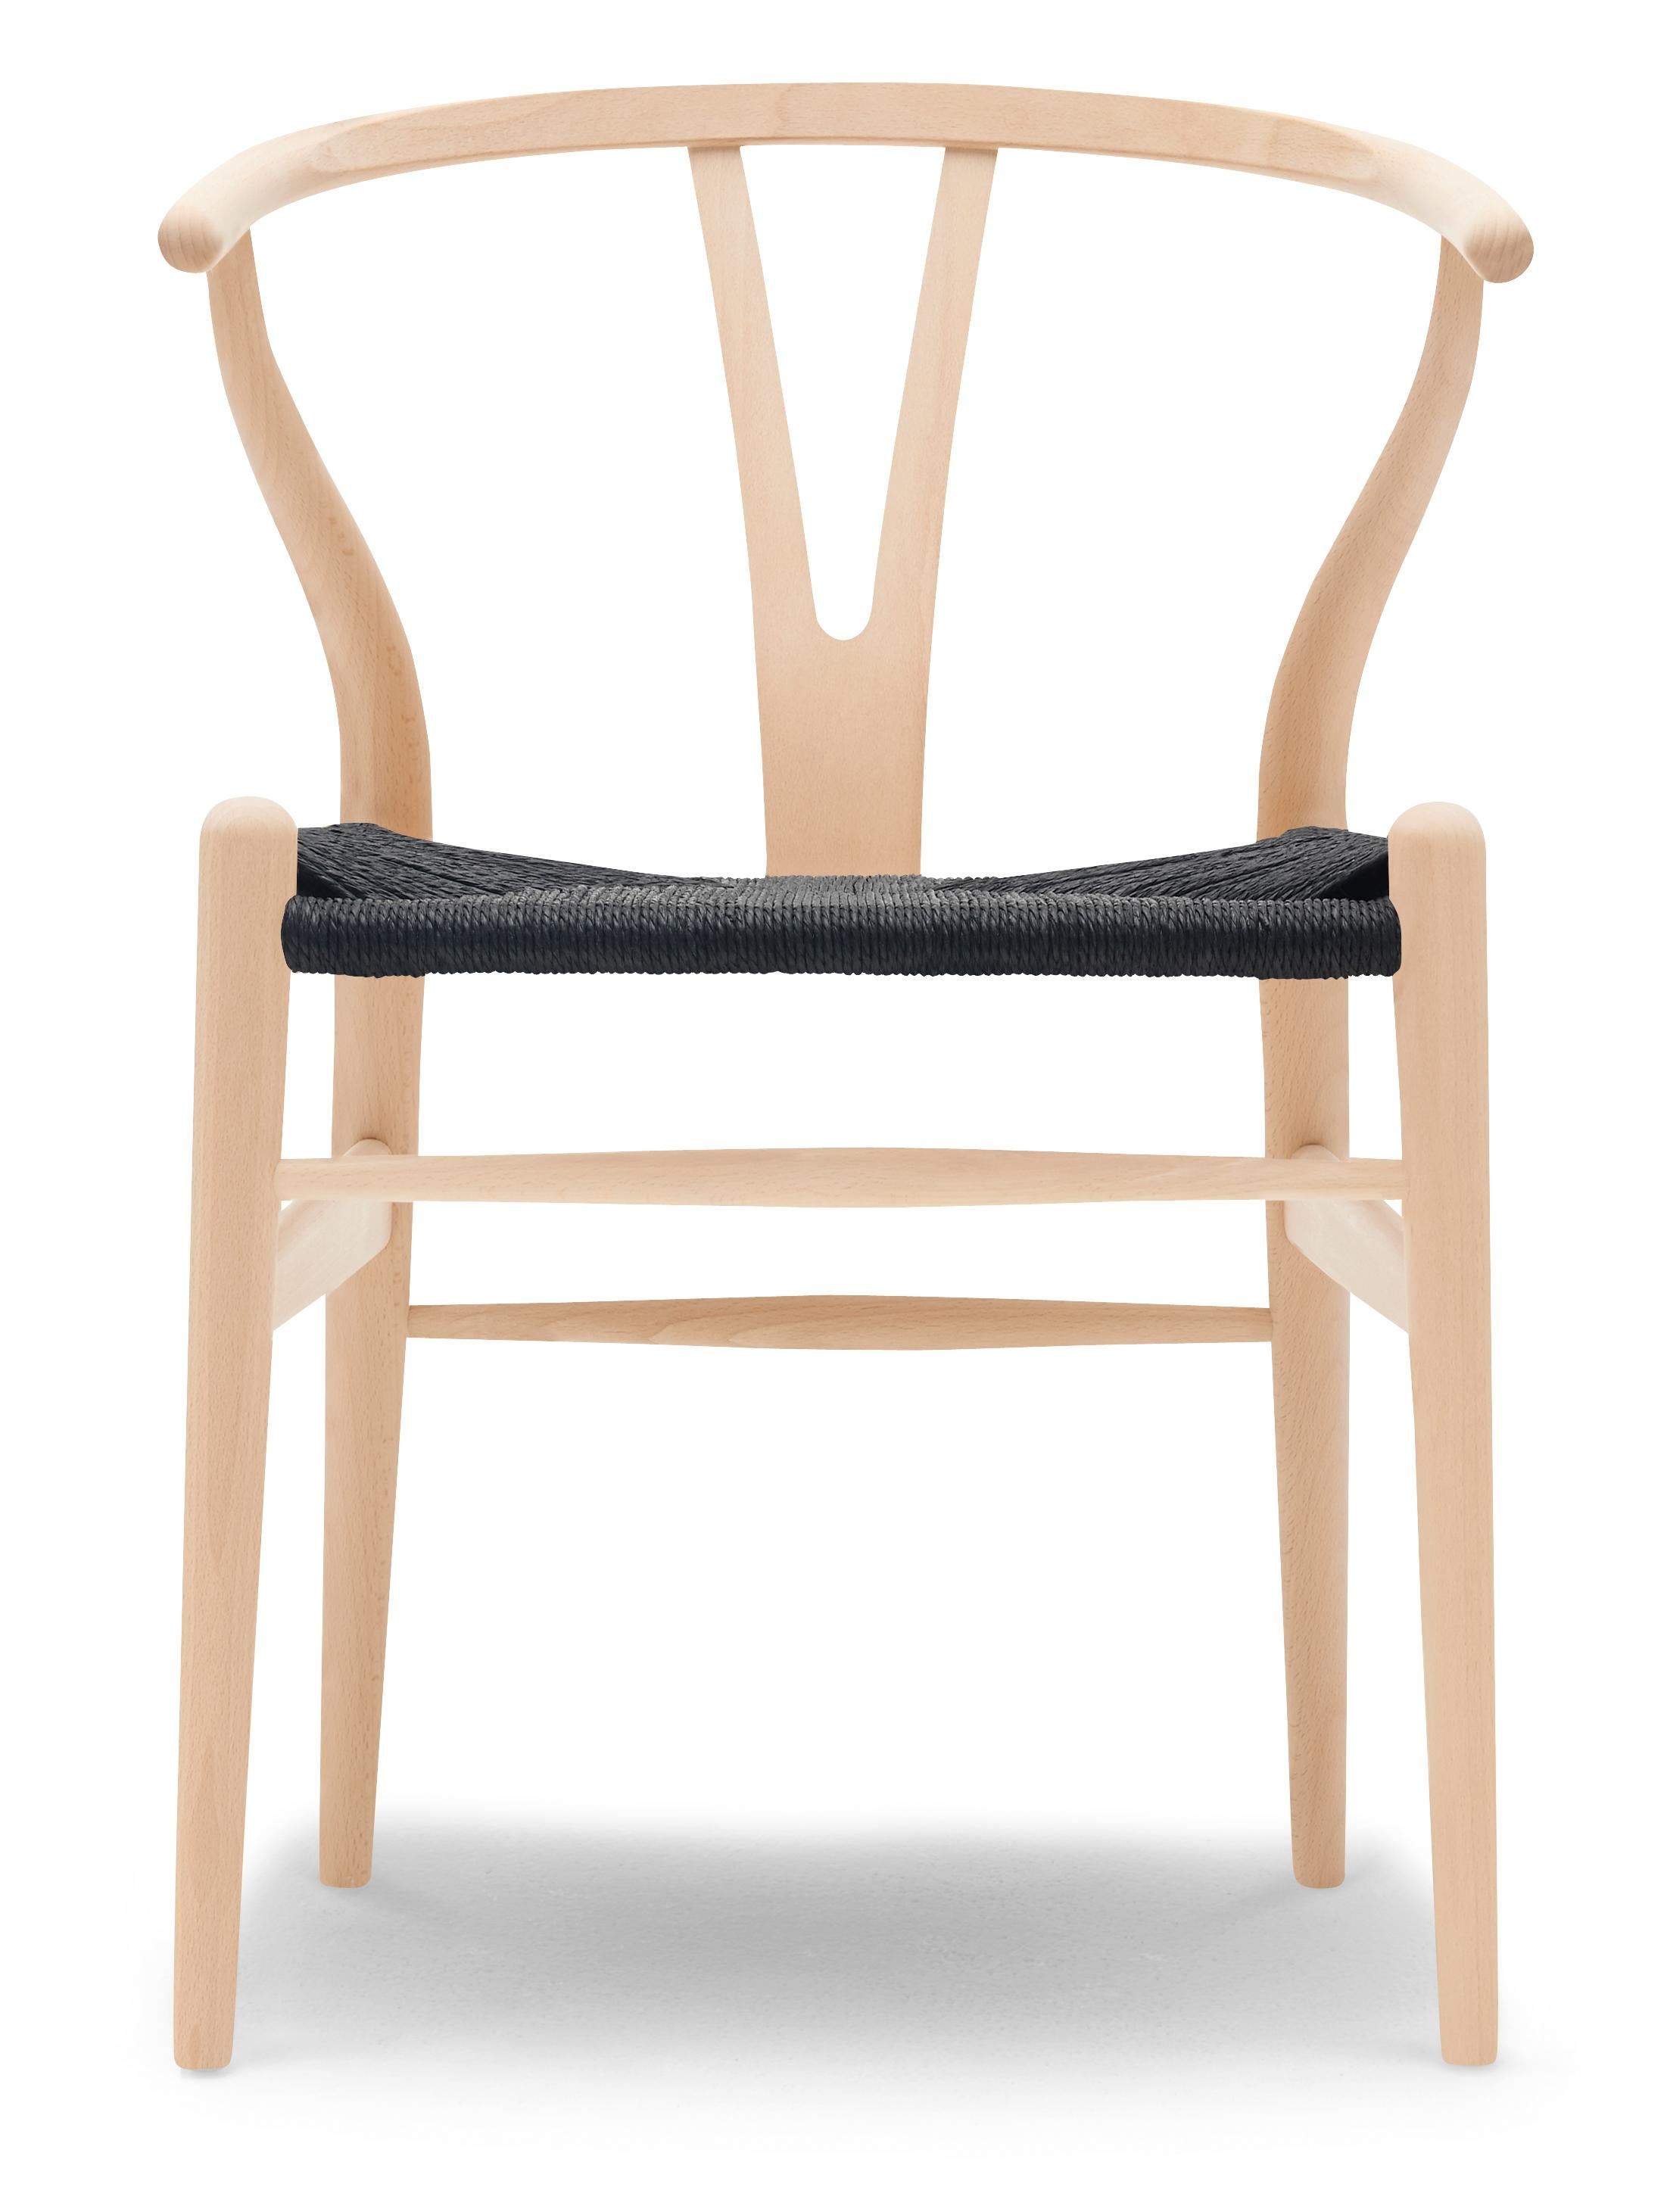 Beige (Beech Soap) CH24 Wishbone Chair in Wood Finishes with Black Papercord Seat by Hans J. Wegner